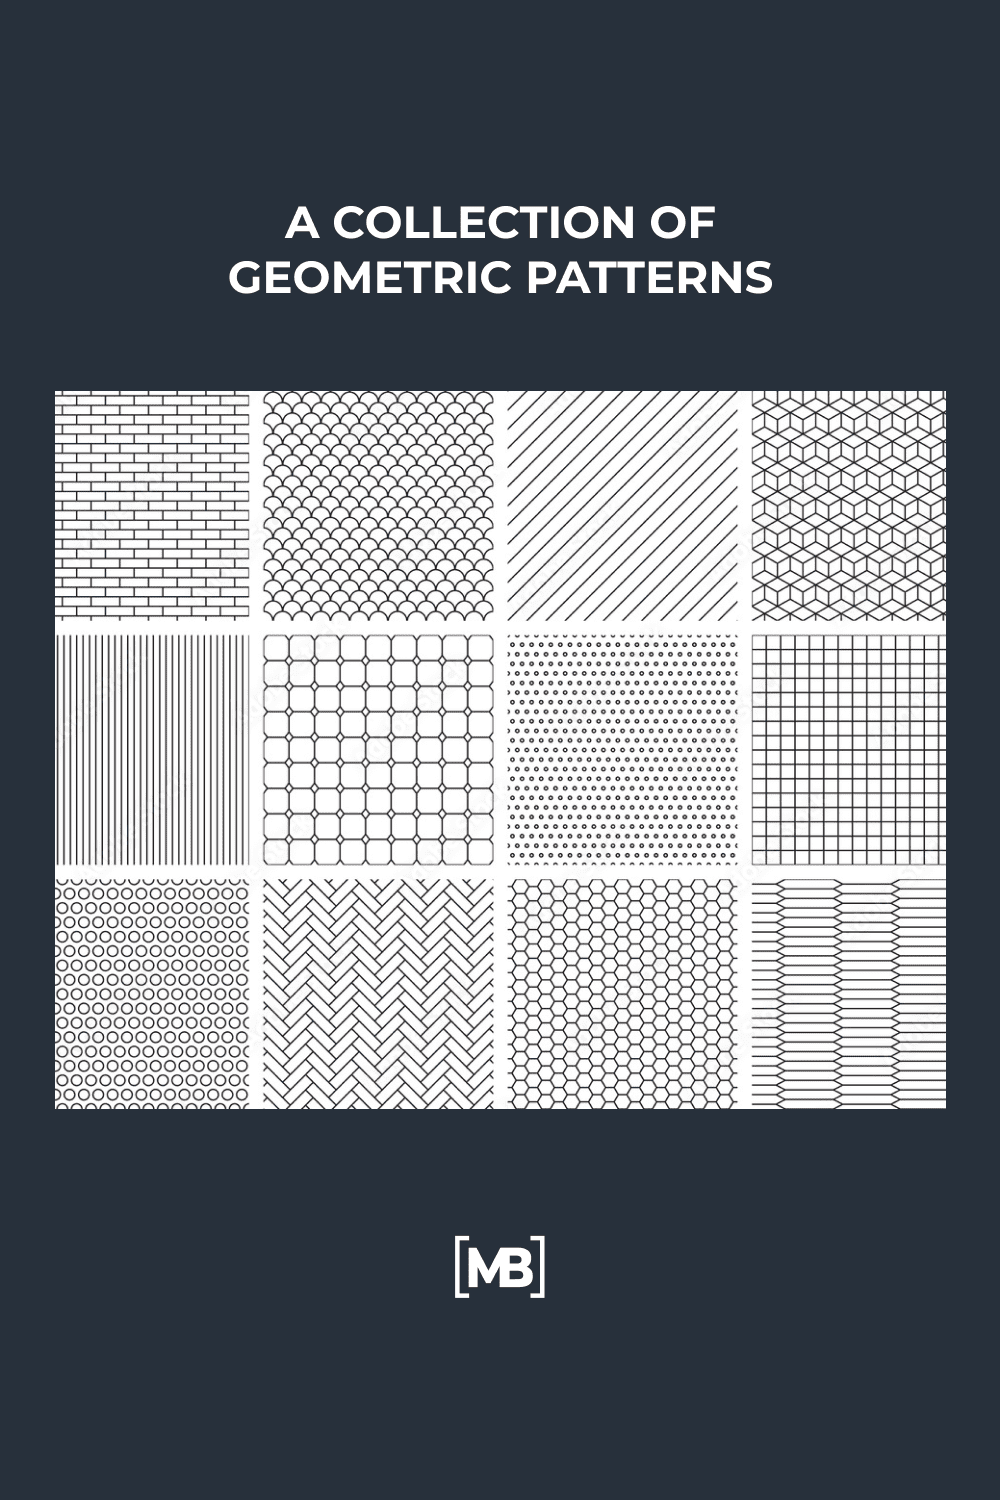 A collection of black and white geometric patterns.